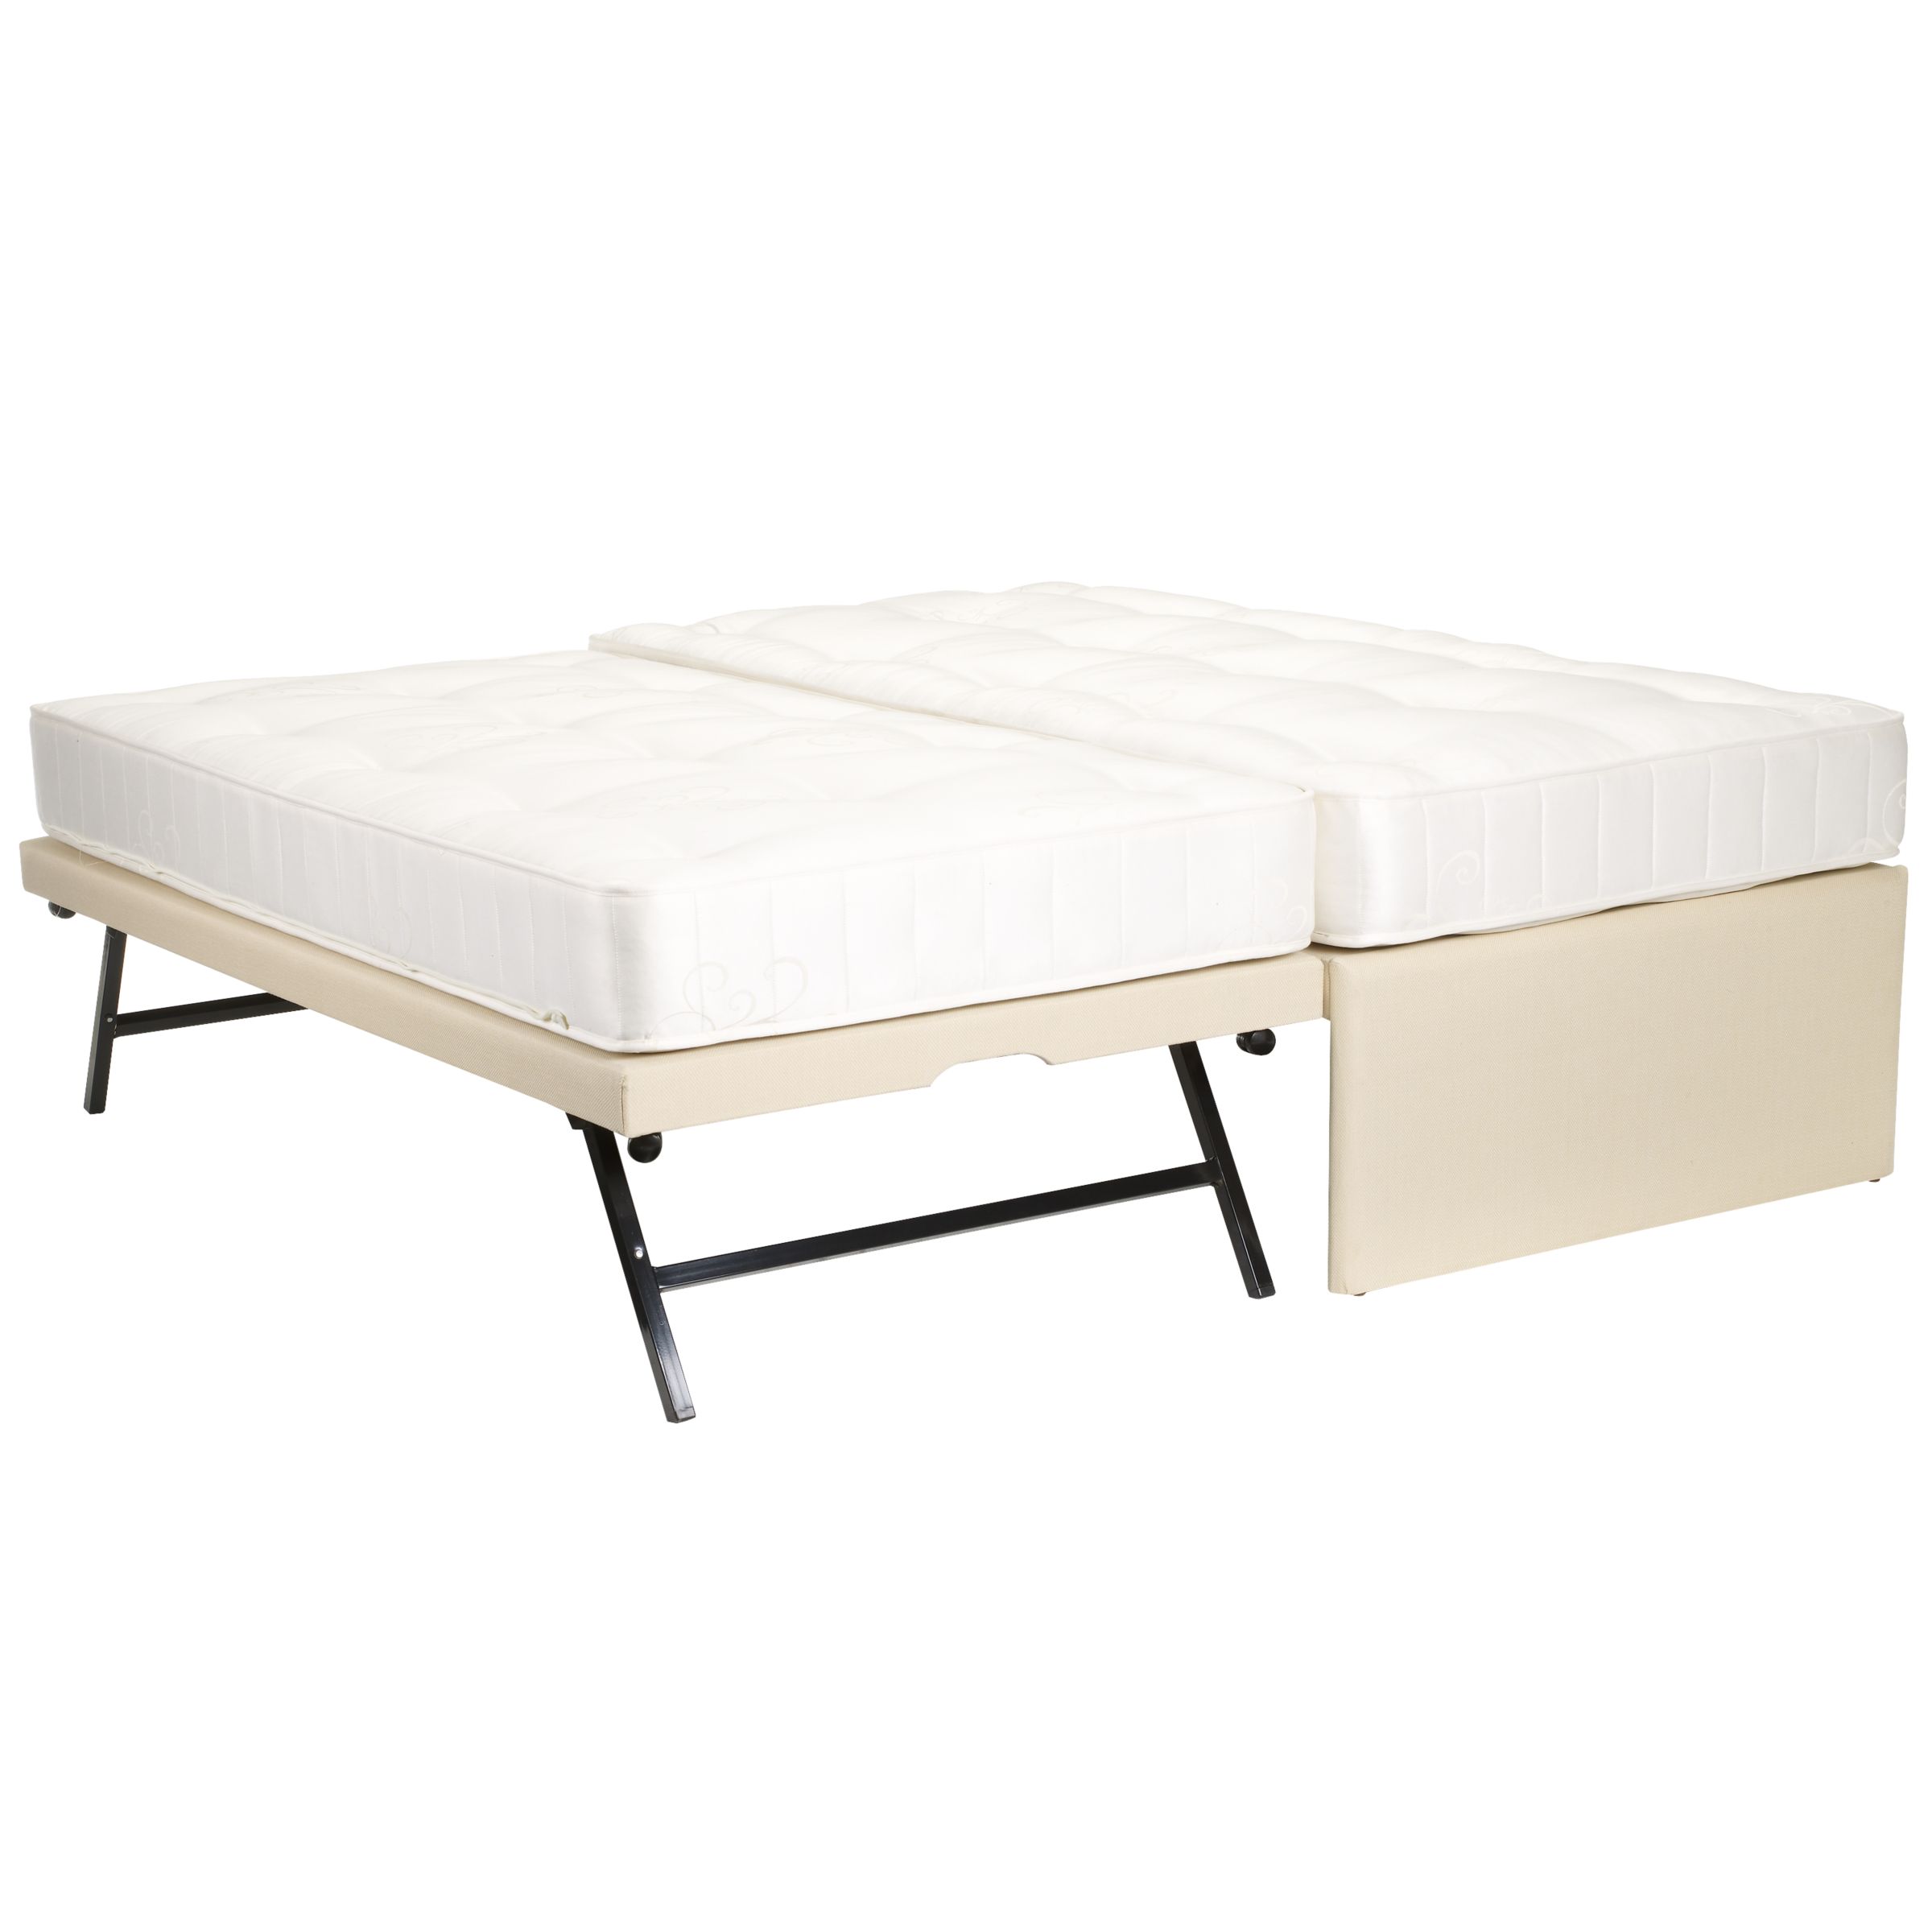 John Lewis Newton Guest Bed with Mattresses, Single at John Lewis